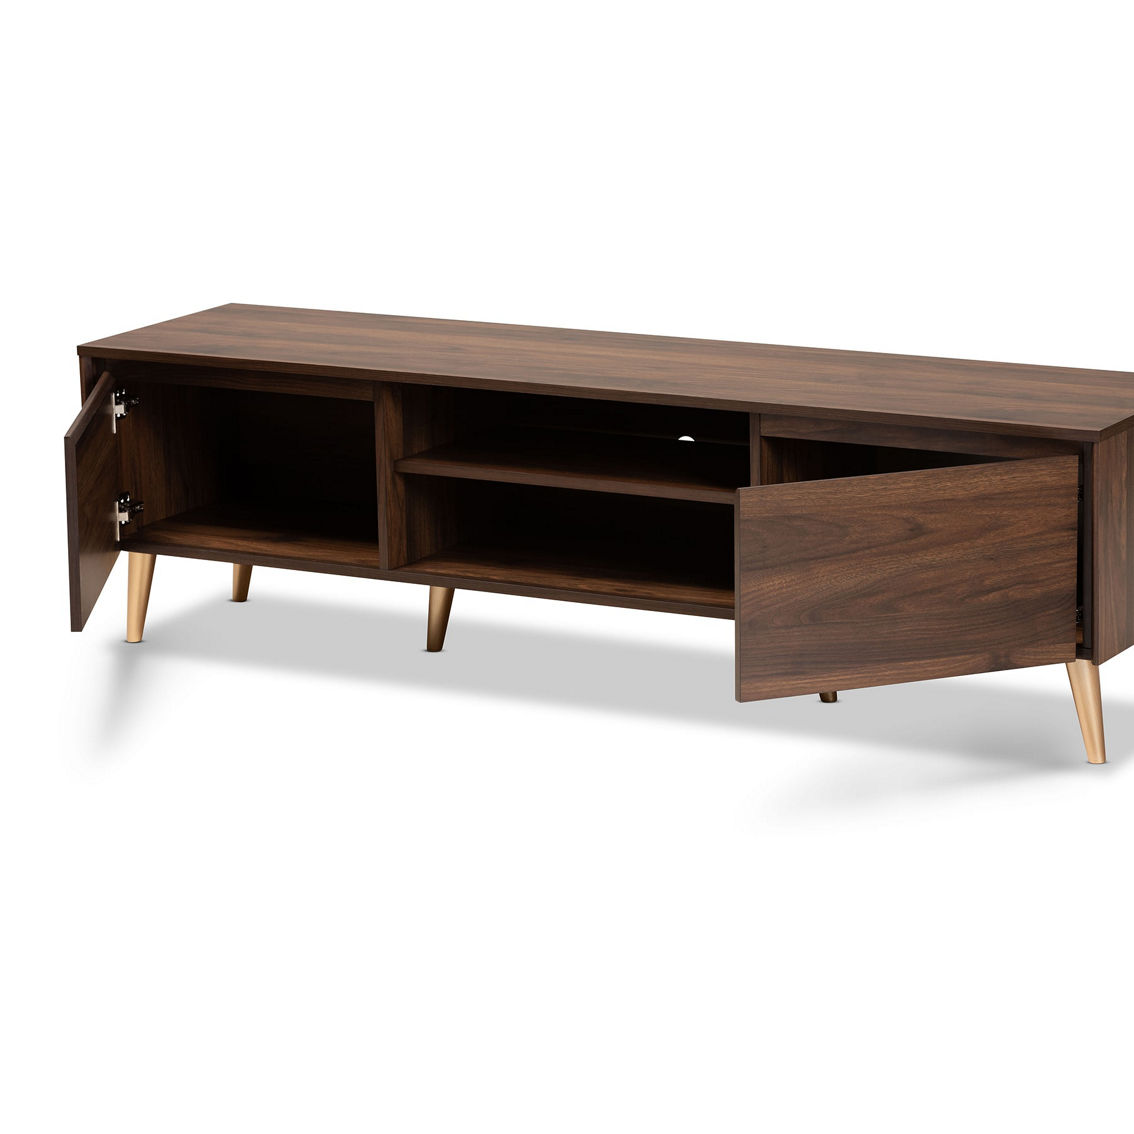 Baxton Studio Landen Walnut Brown and Gold Finished Wood TV Stand - Image 2 of 5